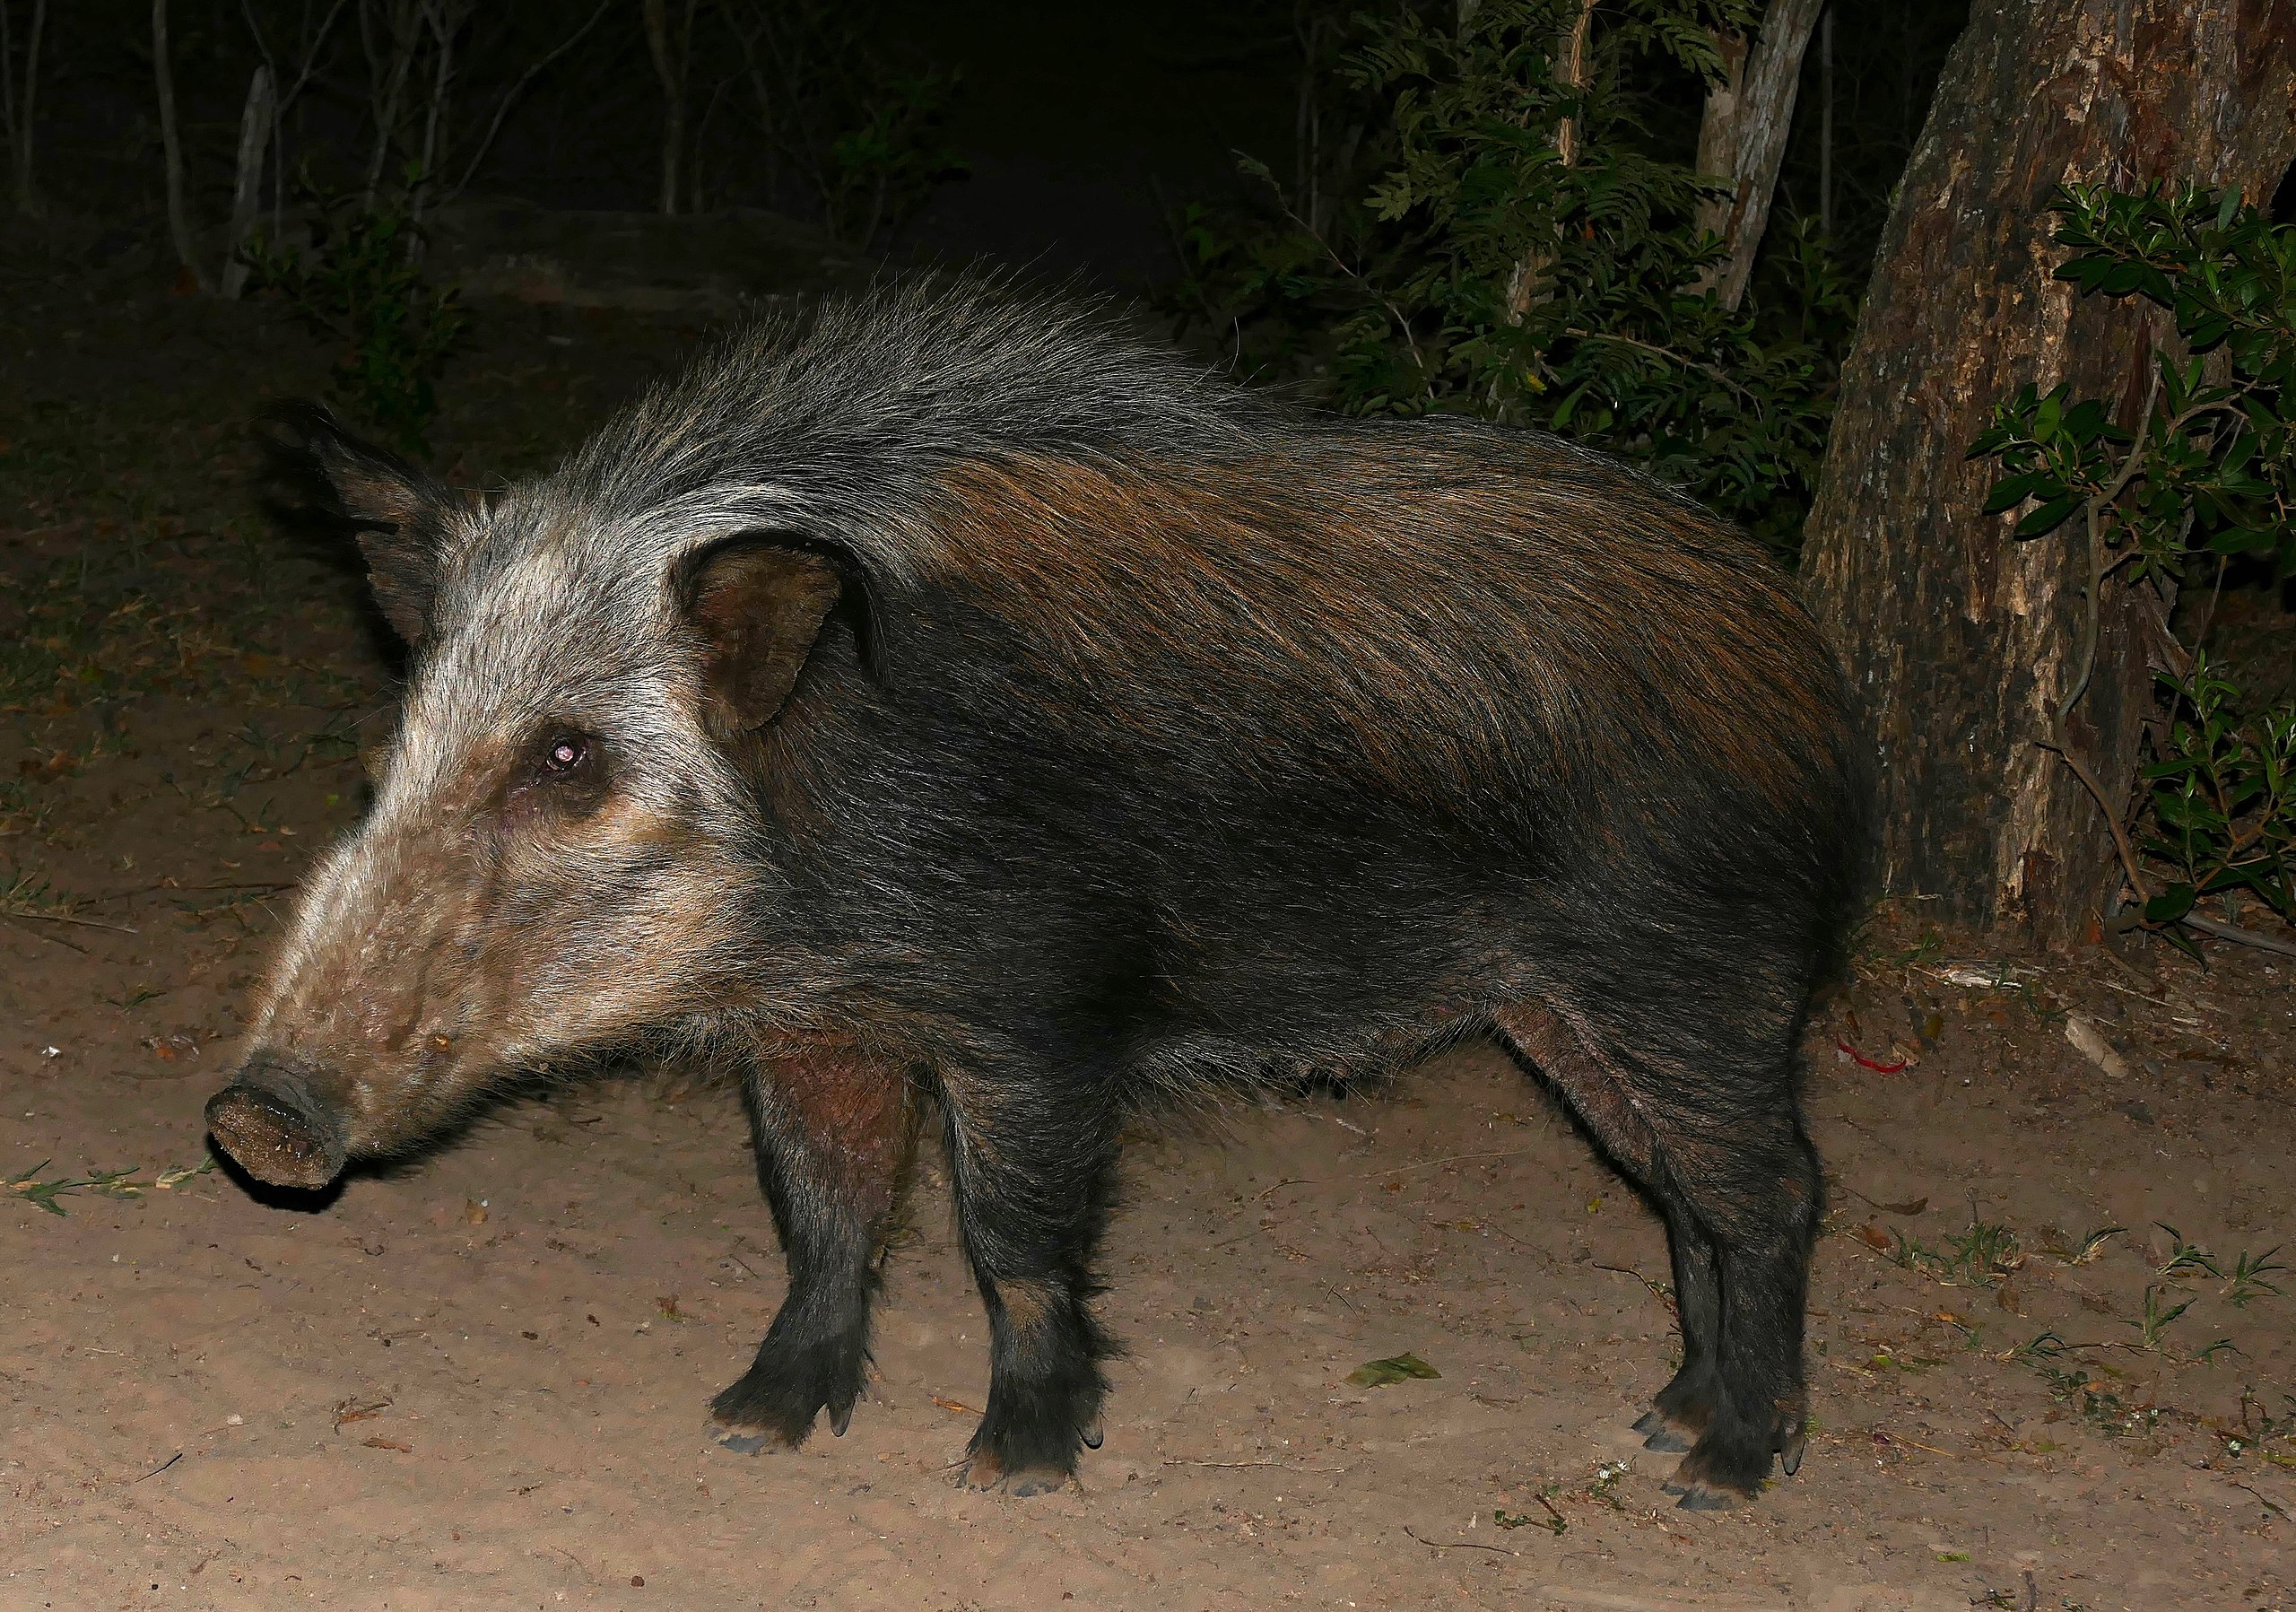 large dark, hairy pig with silver face